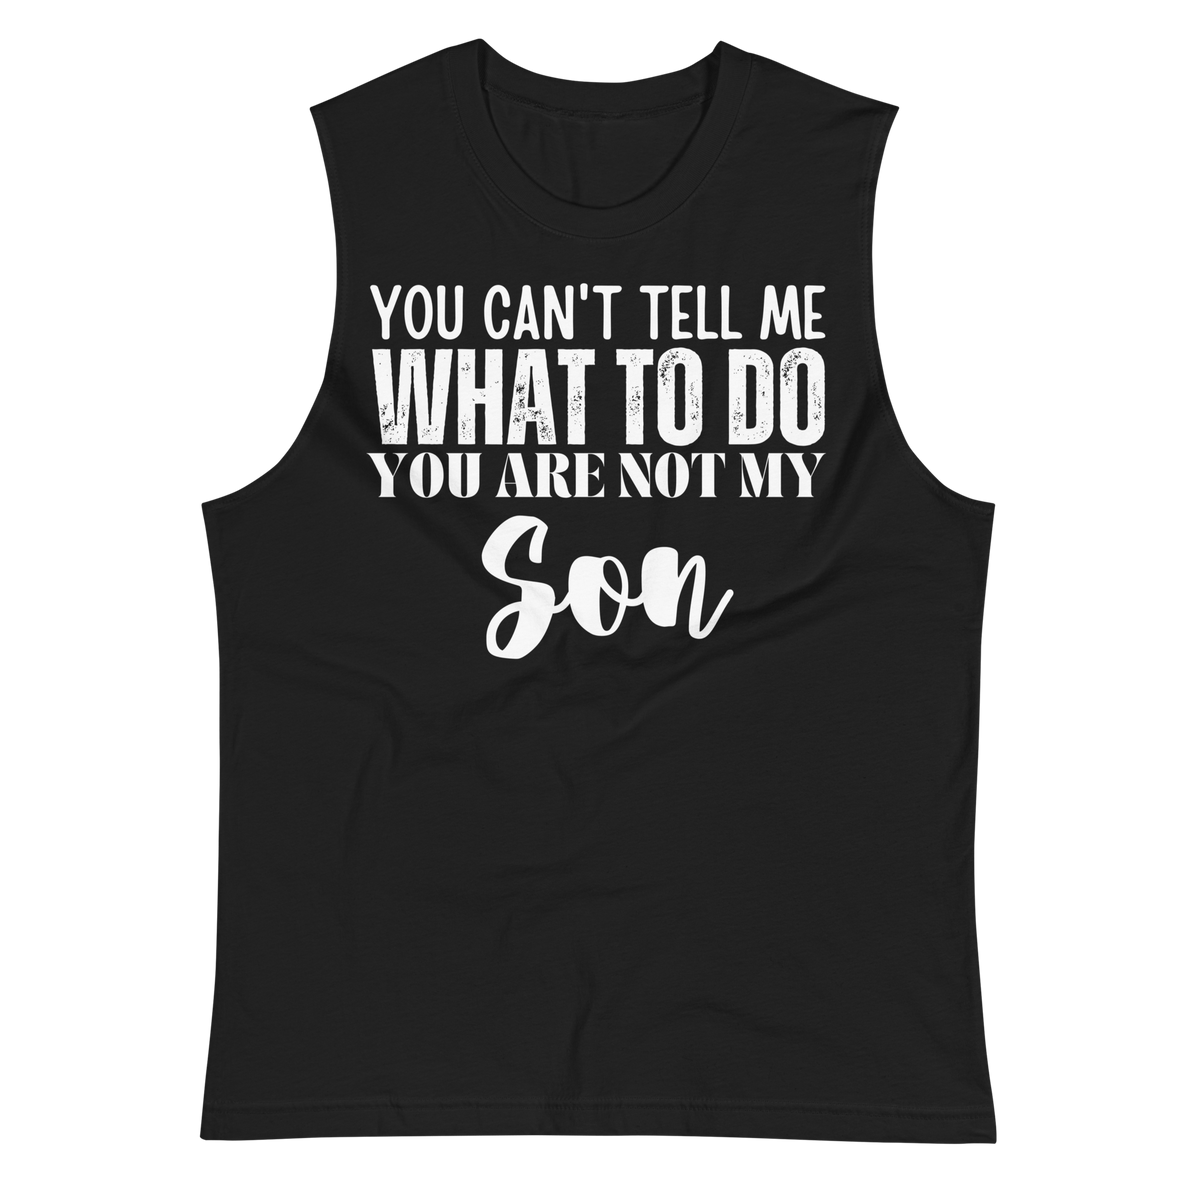 Dad Shirt, Fathers Day Shirt, Funny Mens Shirt, Funny Dad Shirt, Tell me what to do, Gift for him, Gift for her, New Papa Gift, Funny Mom Shirt, Mom Shirt, New Dad Shirt, Father Shirt, Dad tee, You Can't tell me What To Do You Are Not My Son Shirt, Muscle Shirt, Sleeveless Shirt